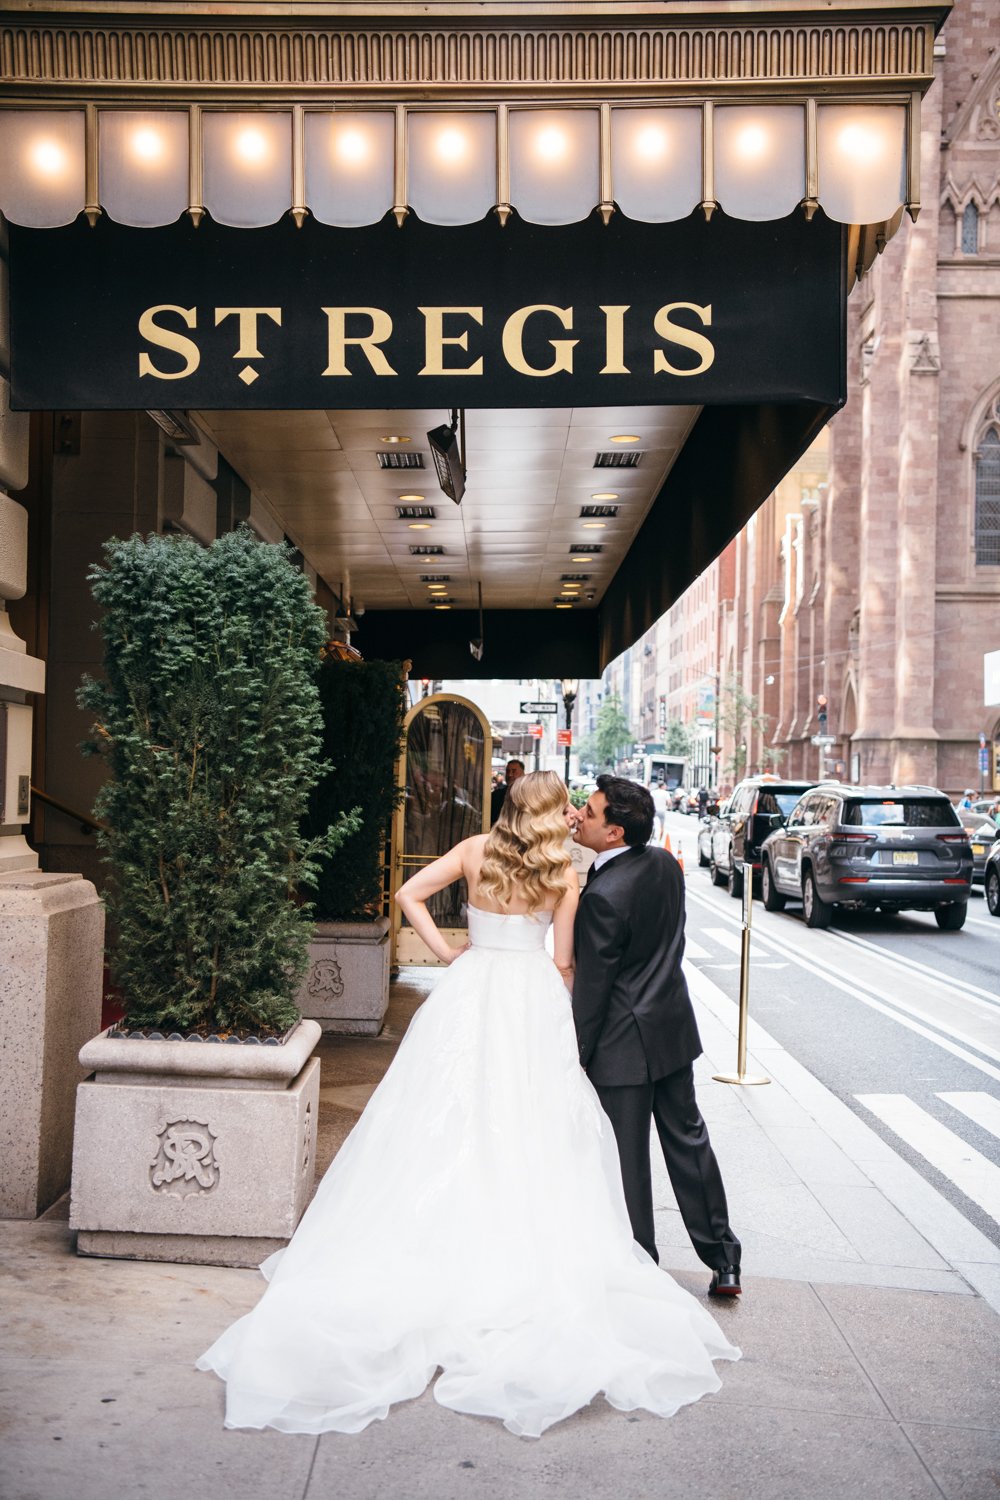 Bride and groom stand below the "St. Regis" awning and kiss.

Manhattan Luxury Wedding. New York Luxury Wedding Photographer. Wedding in Manhattan. NYC Luxury Wedding. Manhattan Bridal Portraits.